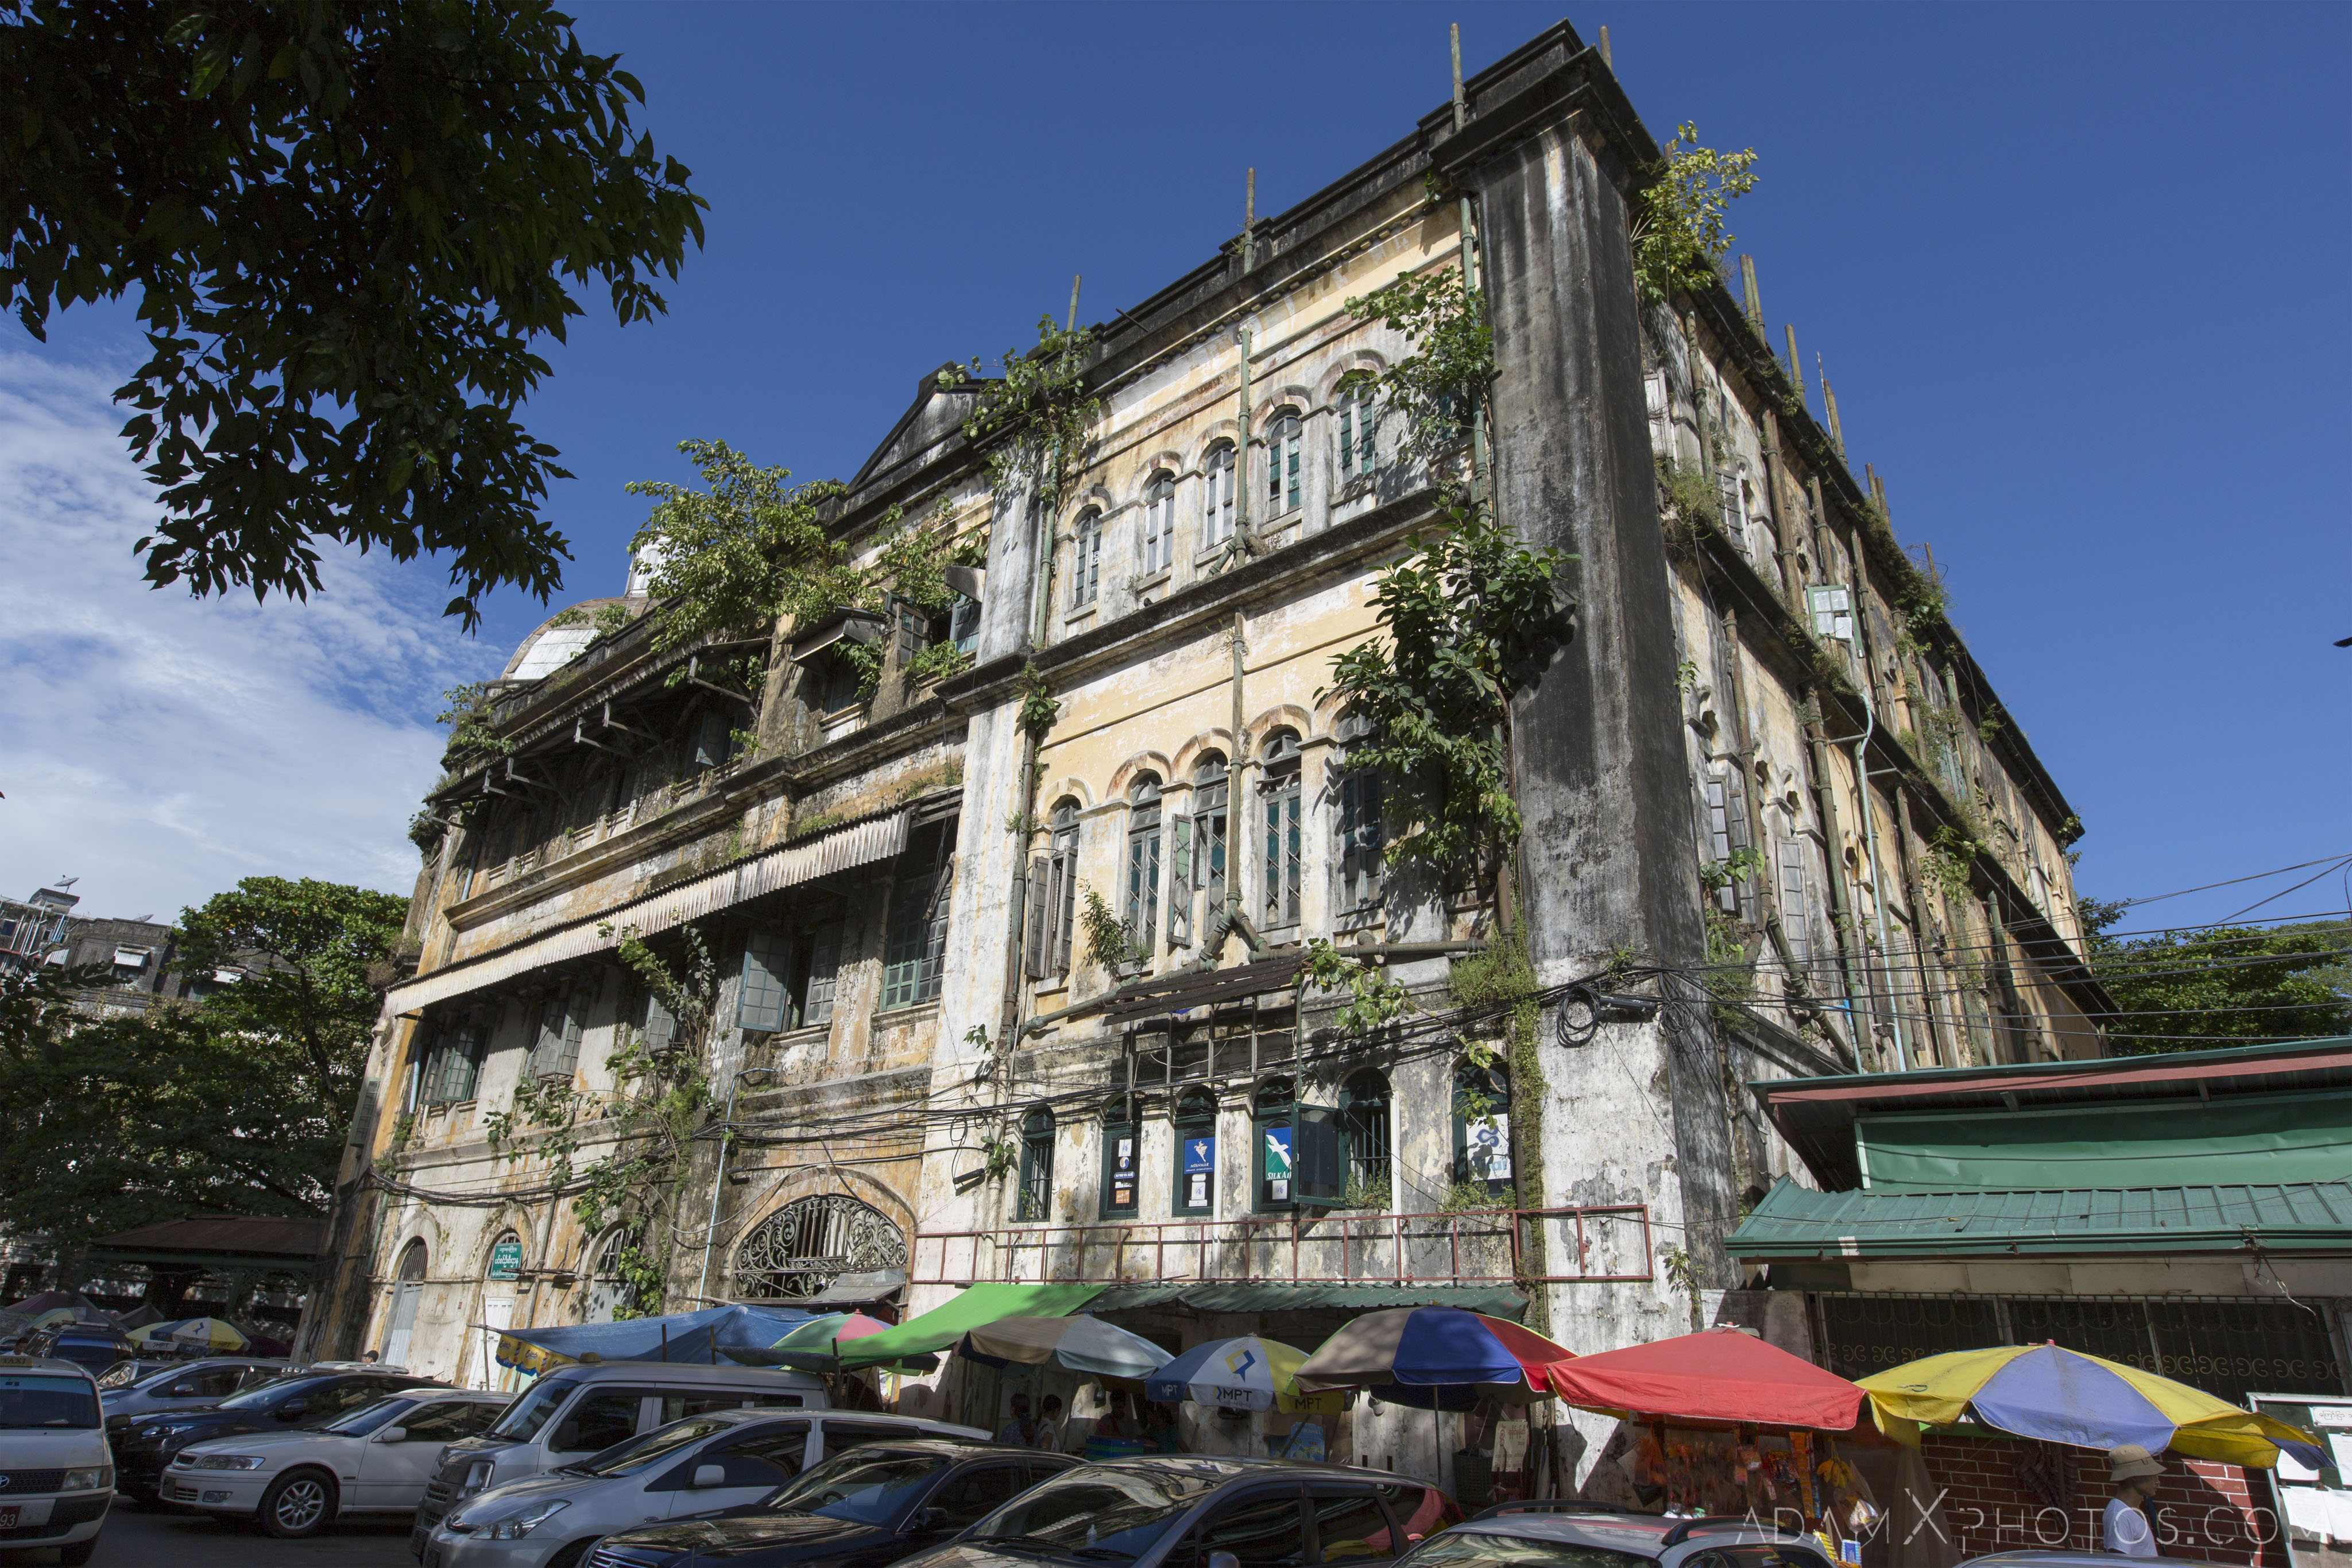 Outside exterior facade Accountant General General's building Customs House Divisional Courthouse Colonial Buildings heritage architecture Myanmar Burma Yangon Rangoon Adam X Urbex Urban Exploration Access 2016 decay ruins derelict location creepy haunting eerie